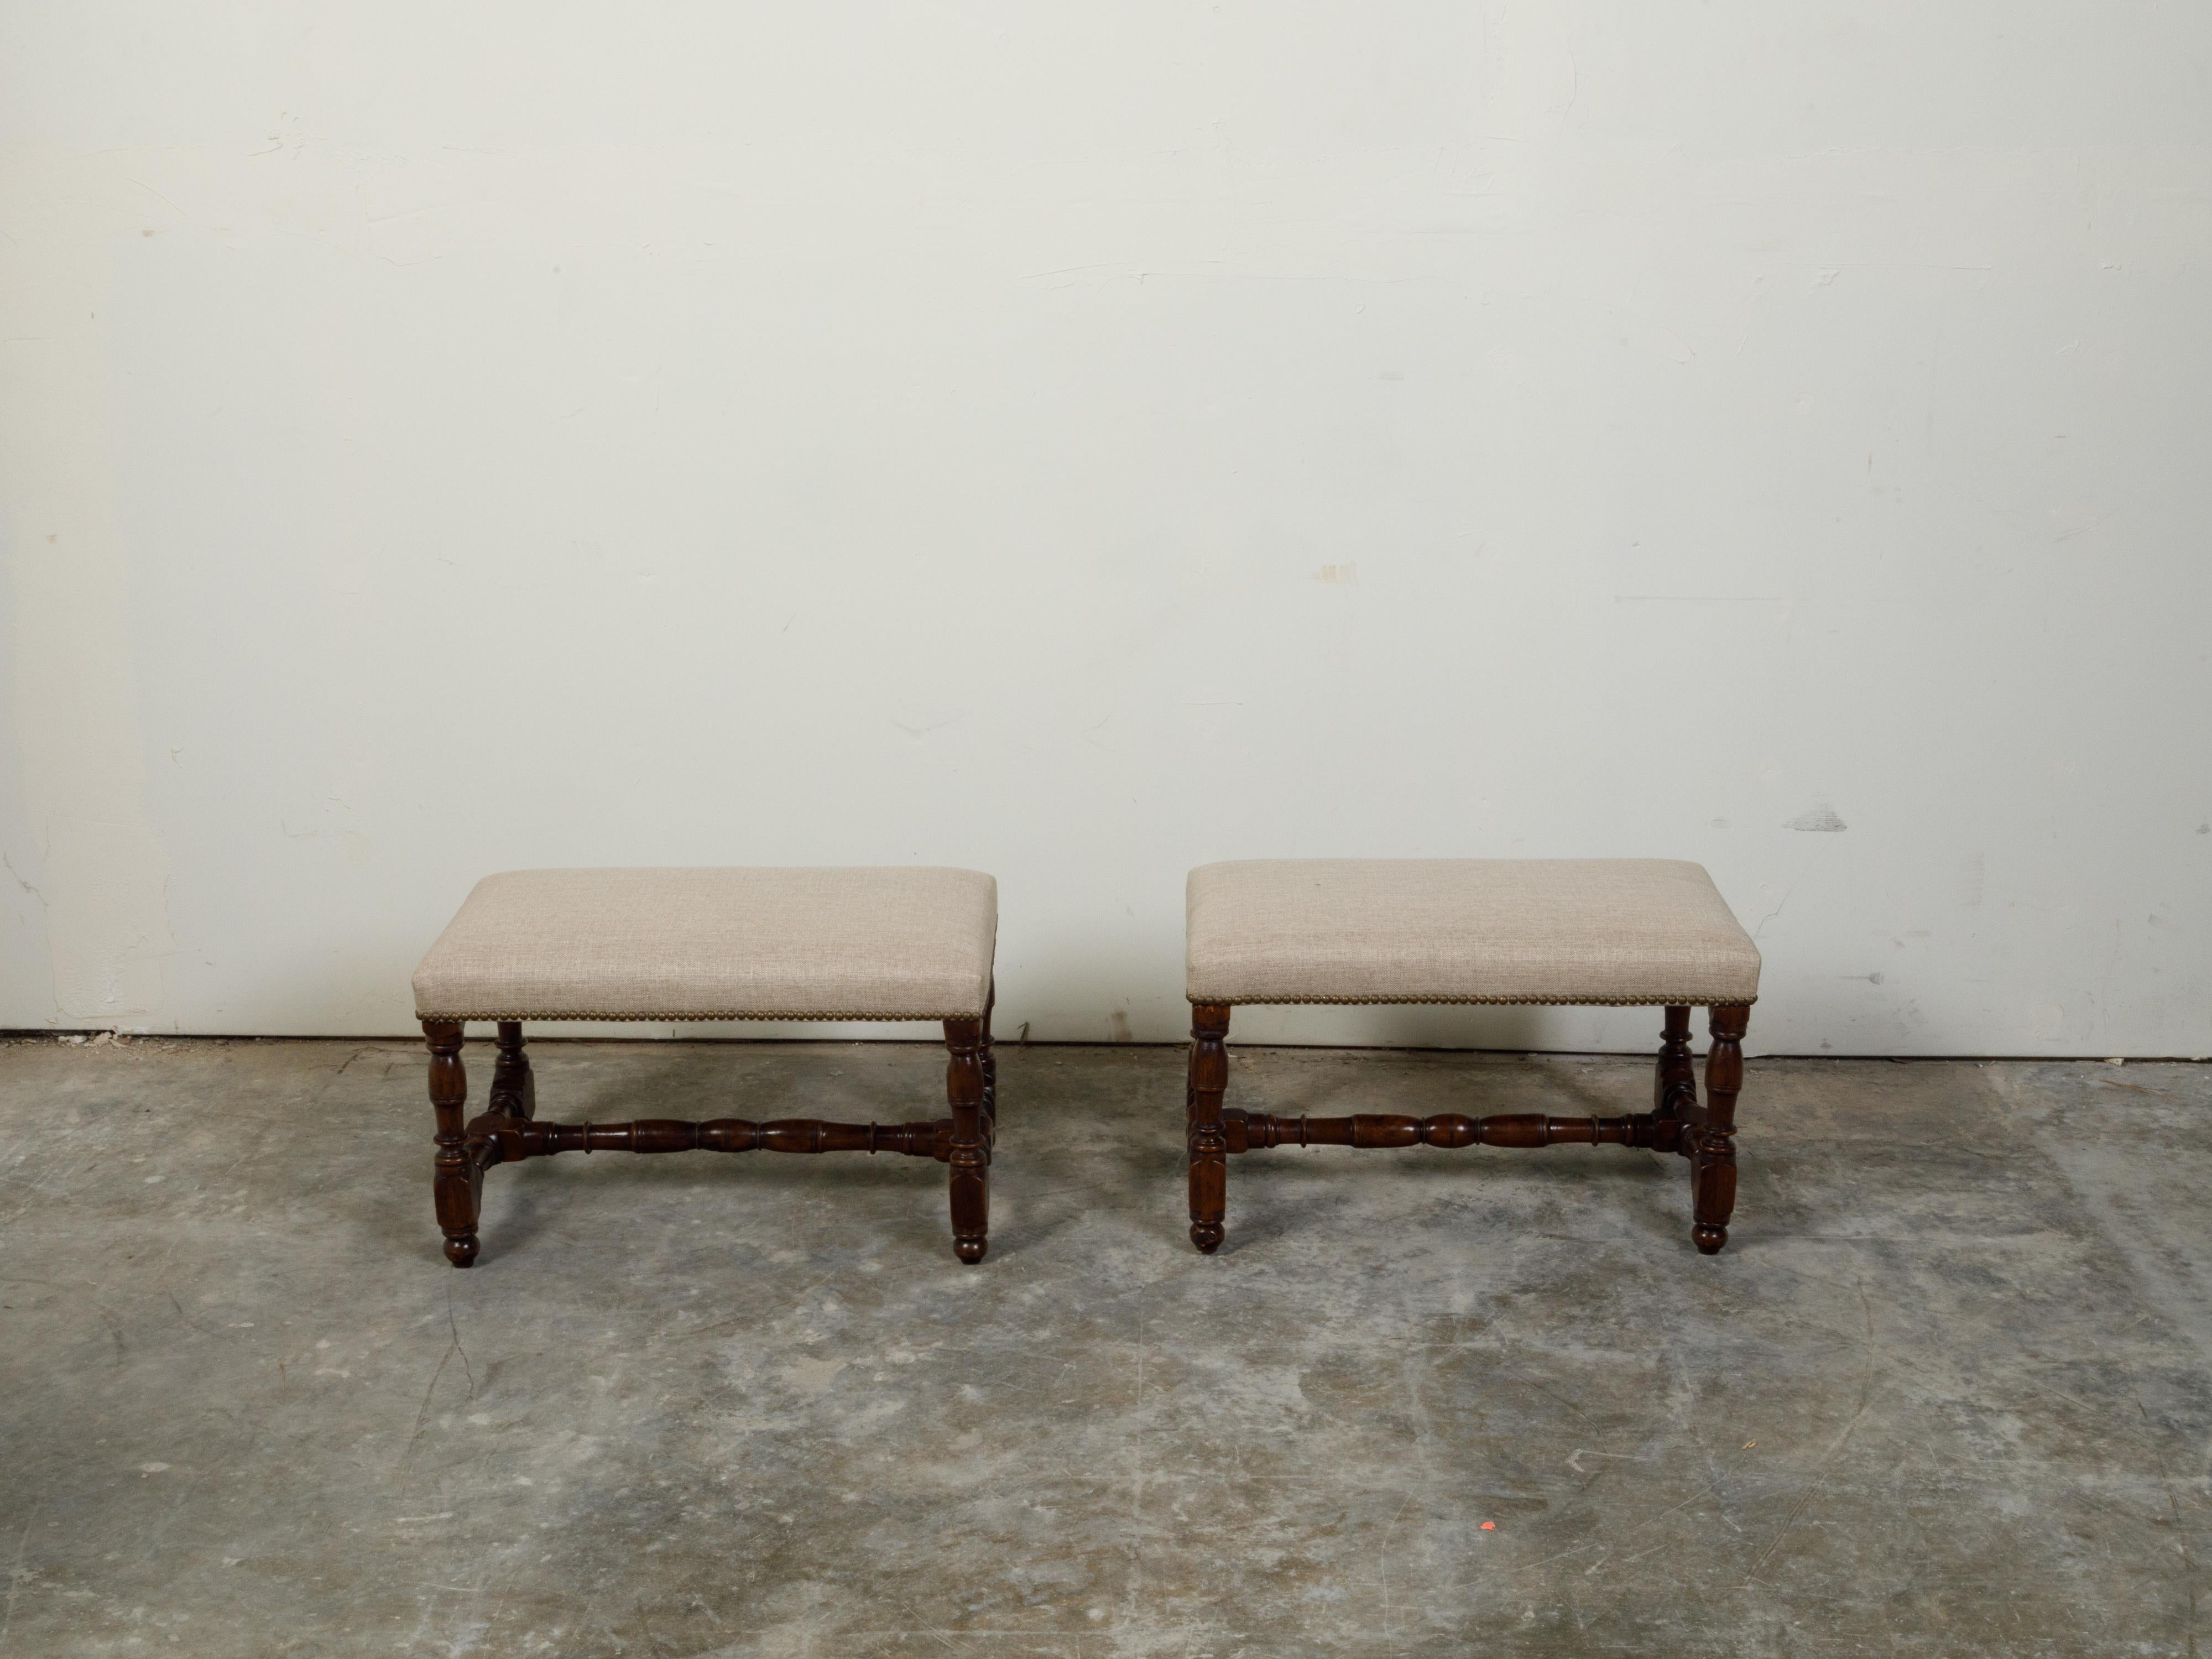 A pair of English oak benches from the 19th century, with turned bases, new upholstery and brass nail heads. Created in England during the 19th century, each of this pair of oak benches features a rectangular top newly reupholstered with a neutral